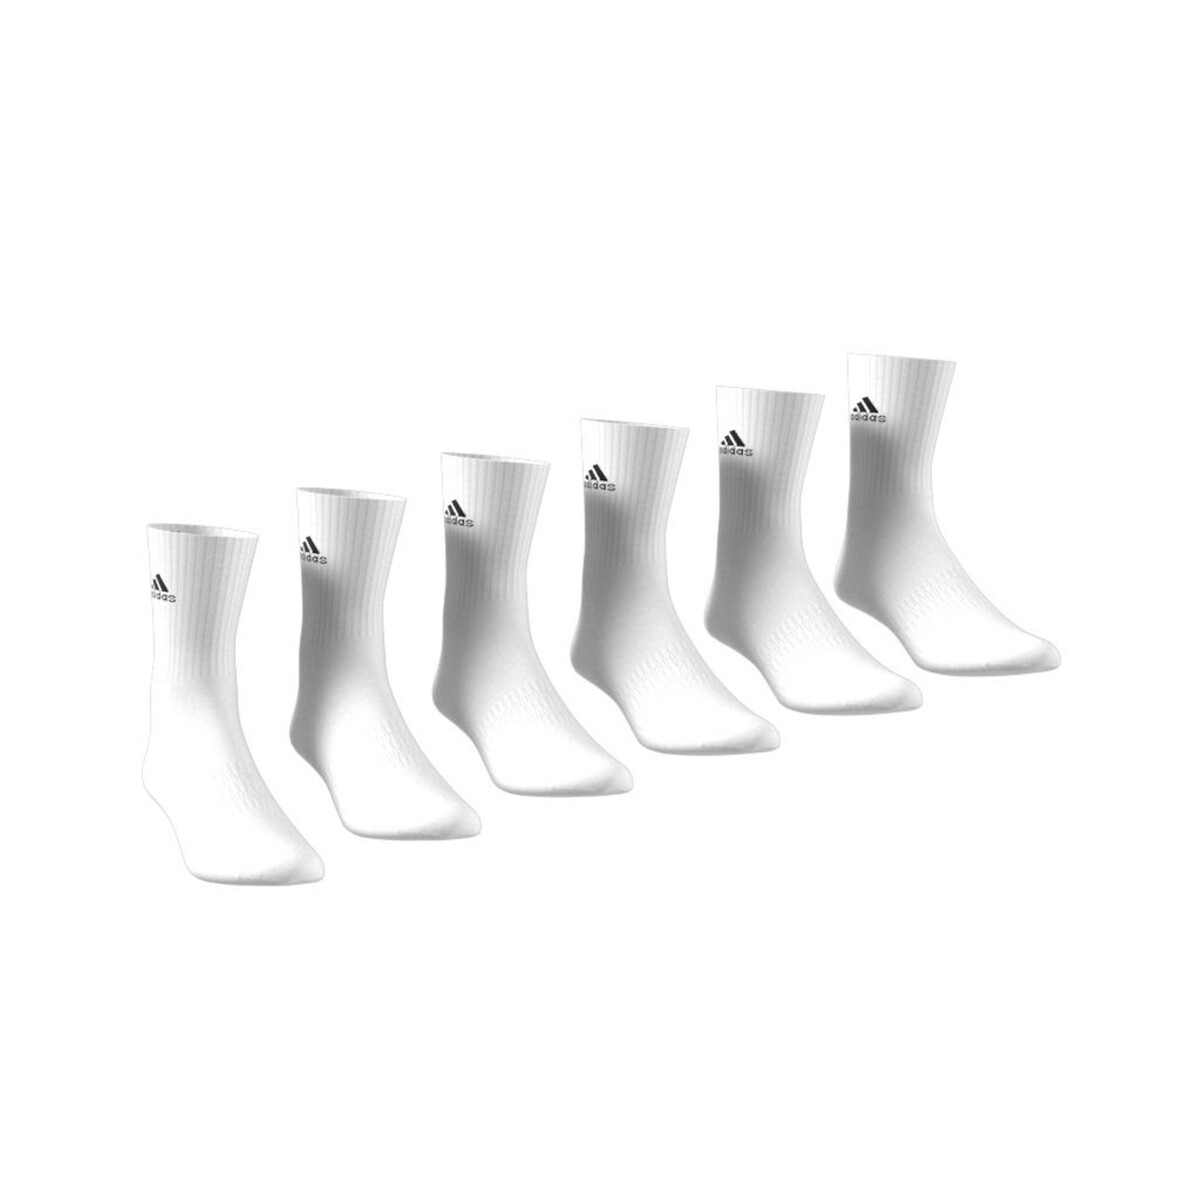 Image of Pack of 6 Pairs of Crew Socks